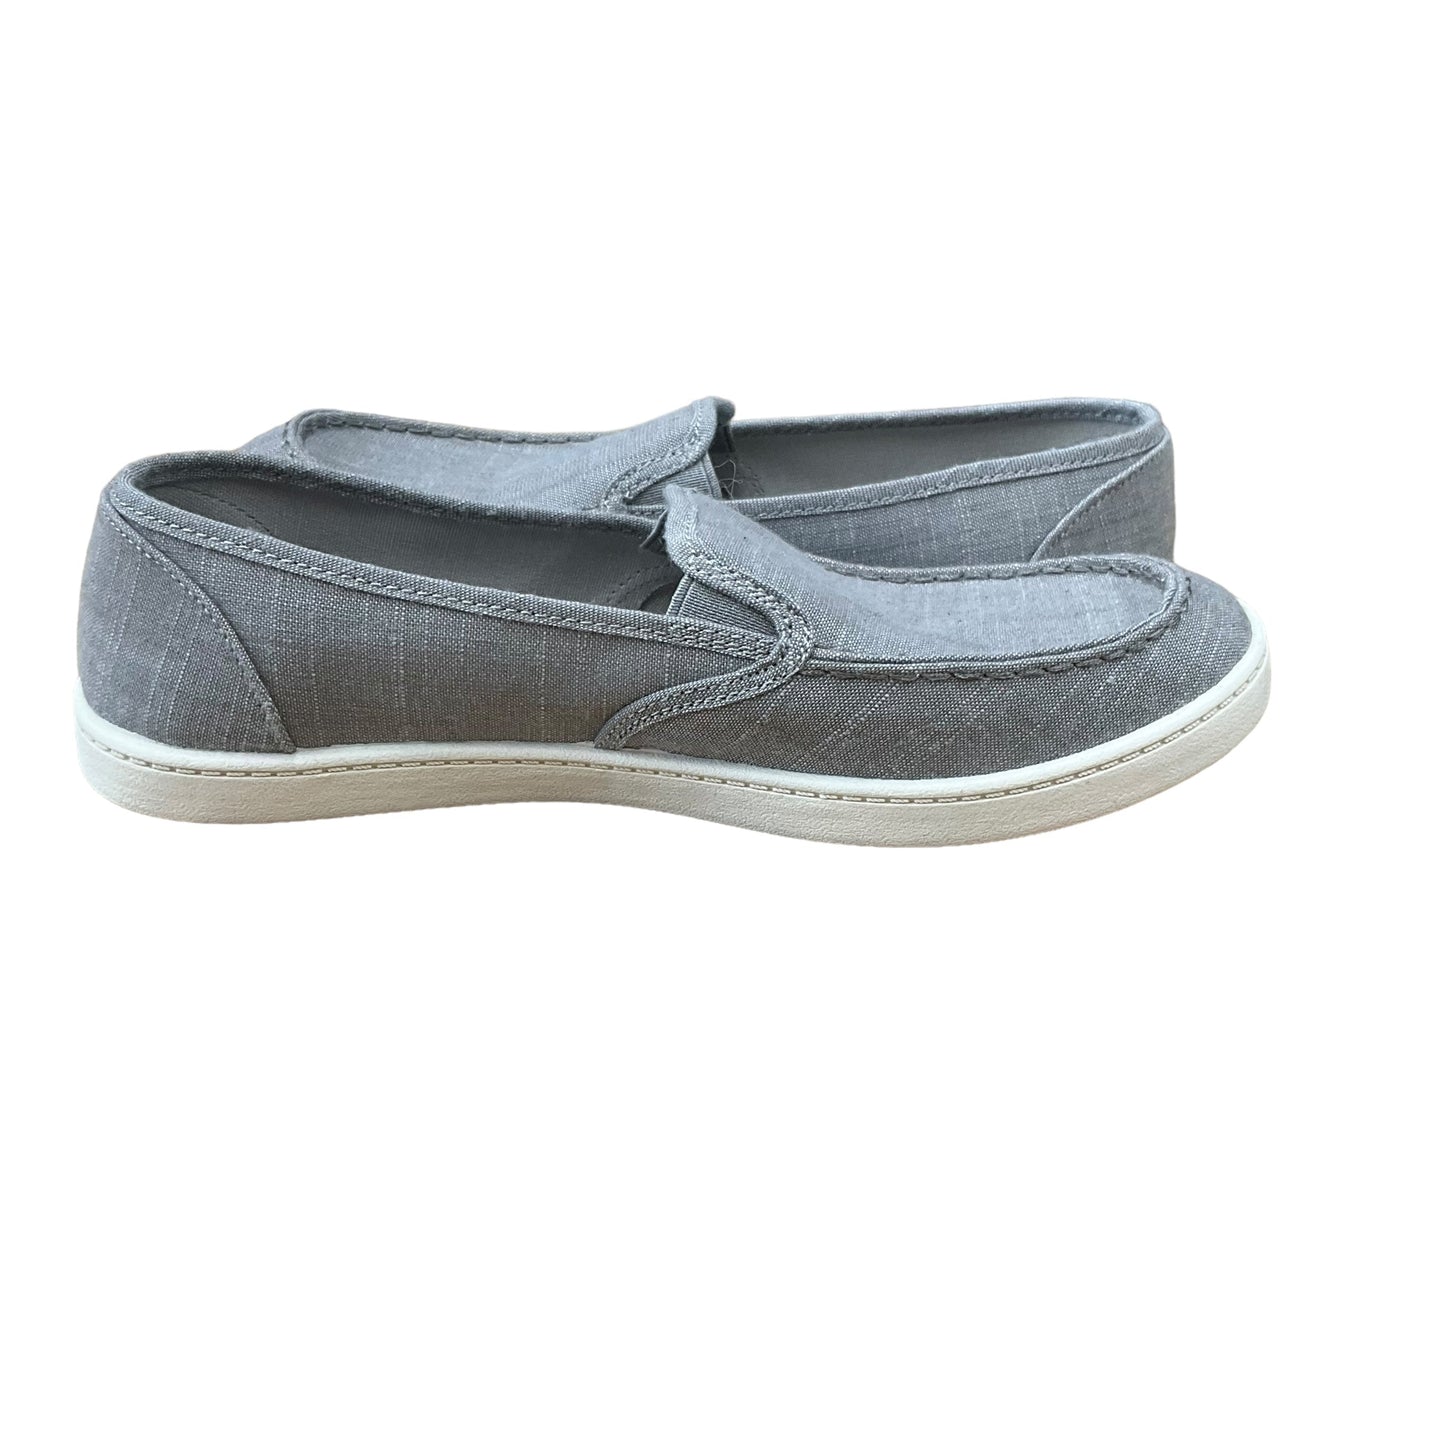 Grey Shoes Flats Time And Tru, Size 8.5